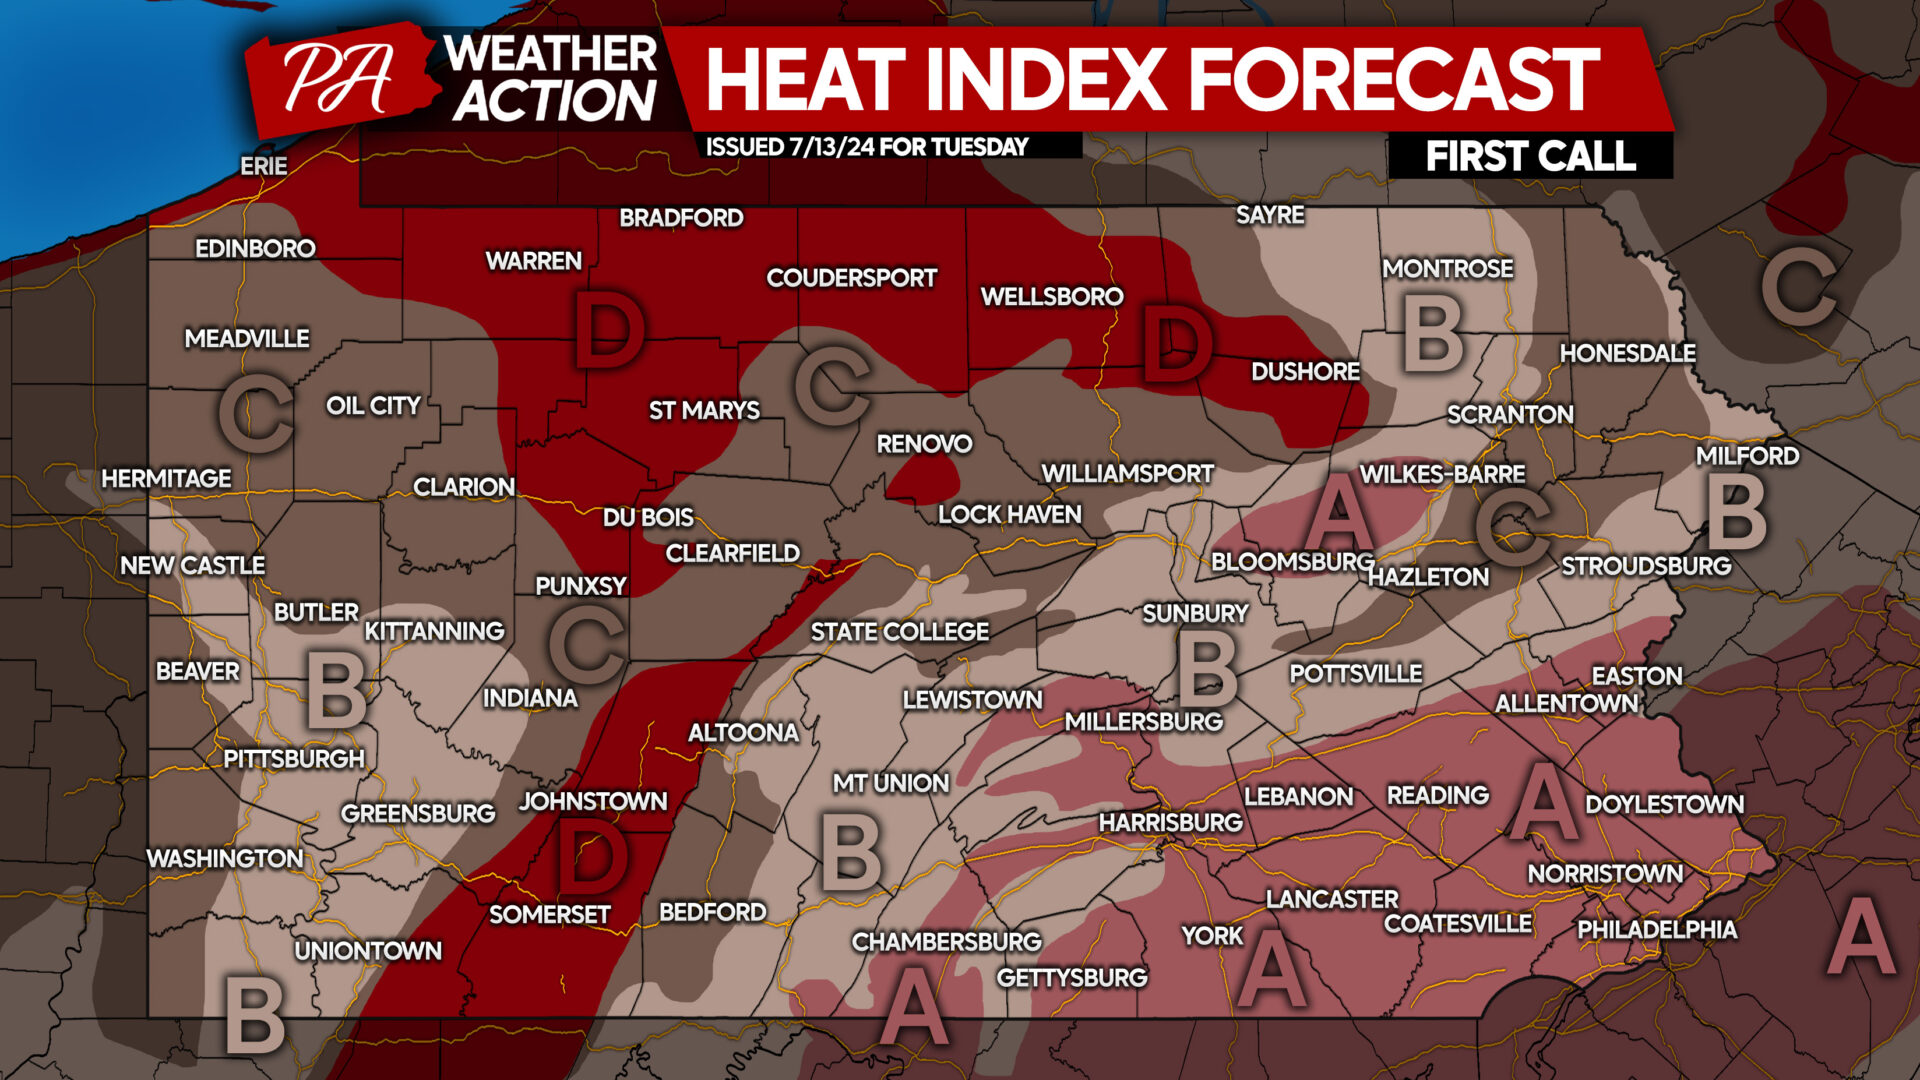 Most Intense Heat Wave Of Summer Coming to Pennsylvania With Heat Indexes Well Over 100°, Then Finally Cooling Down?